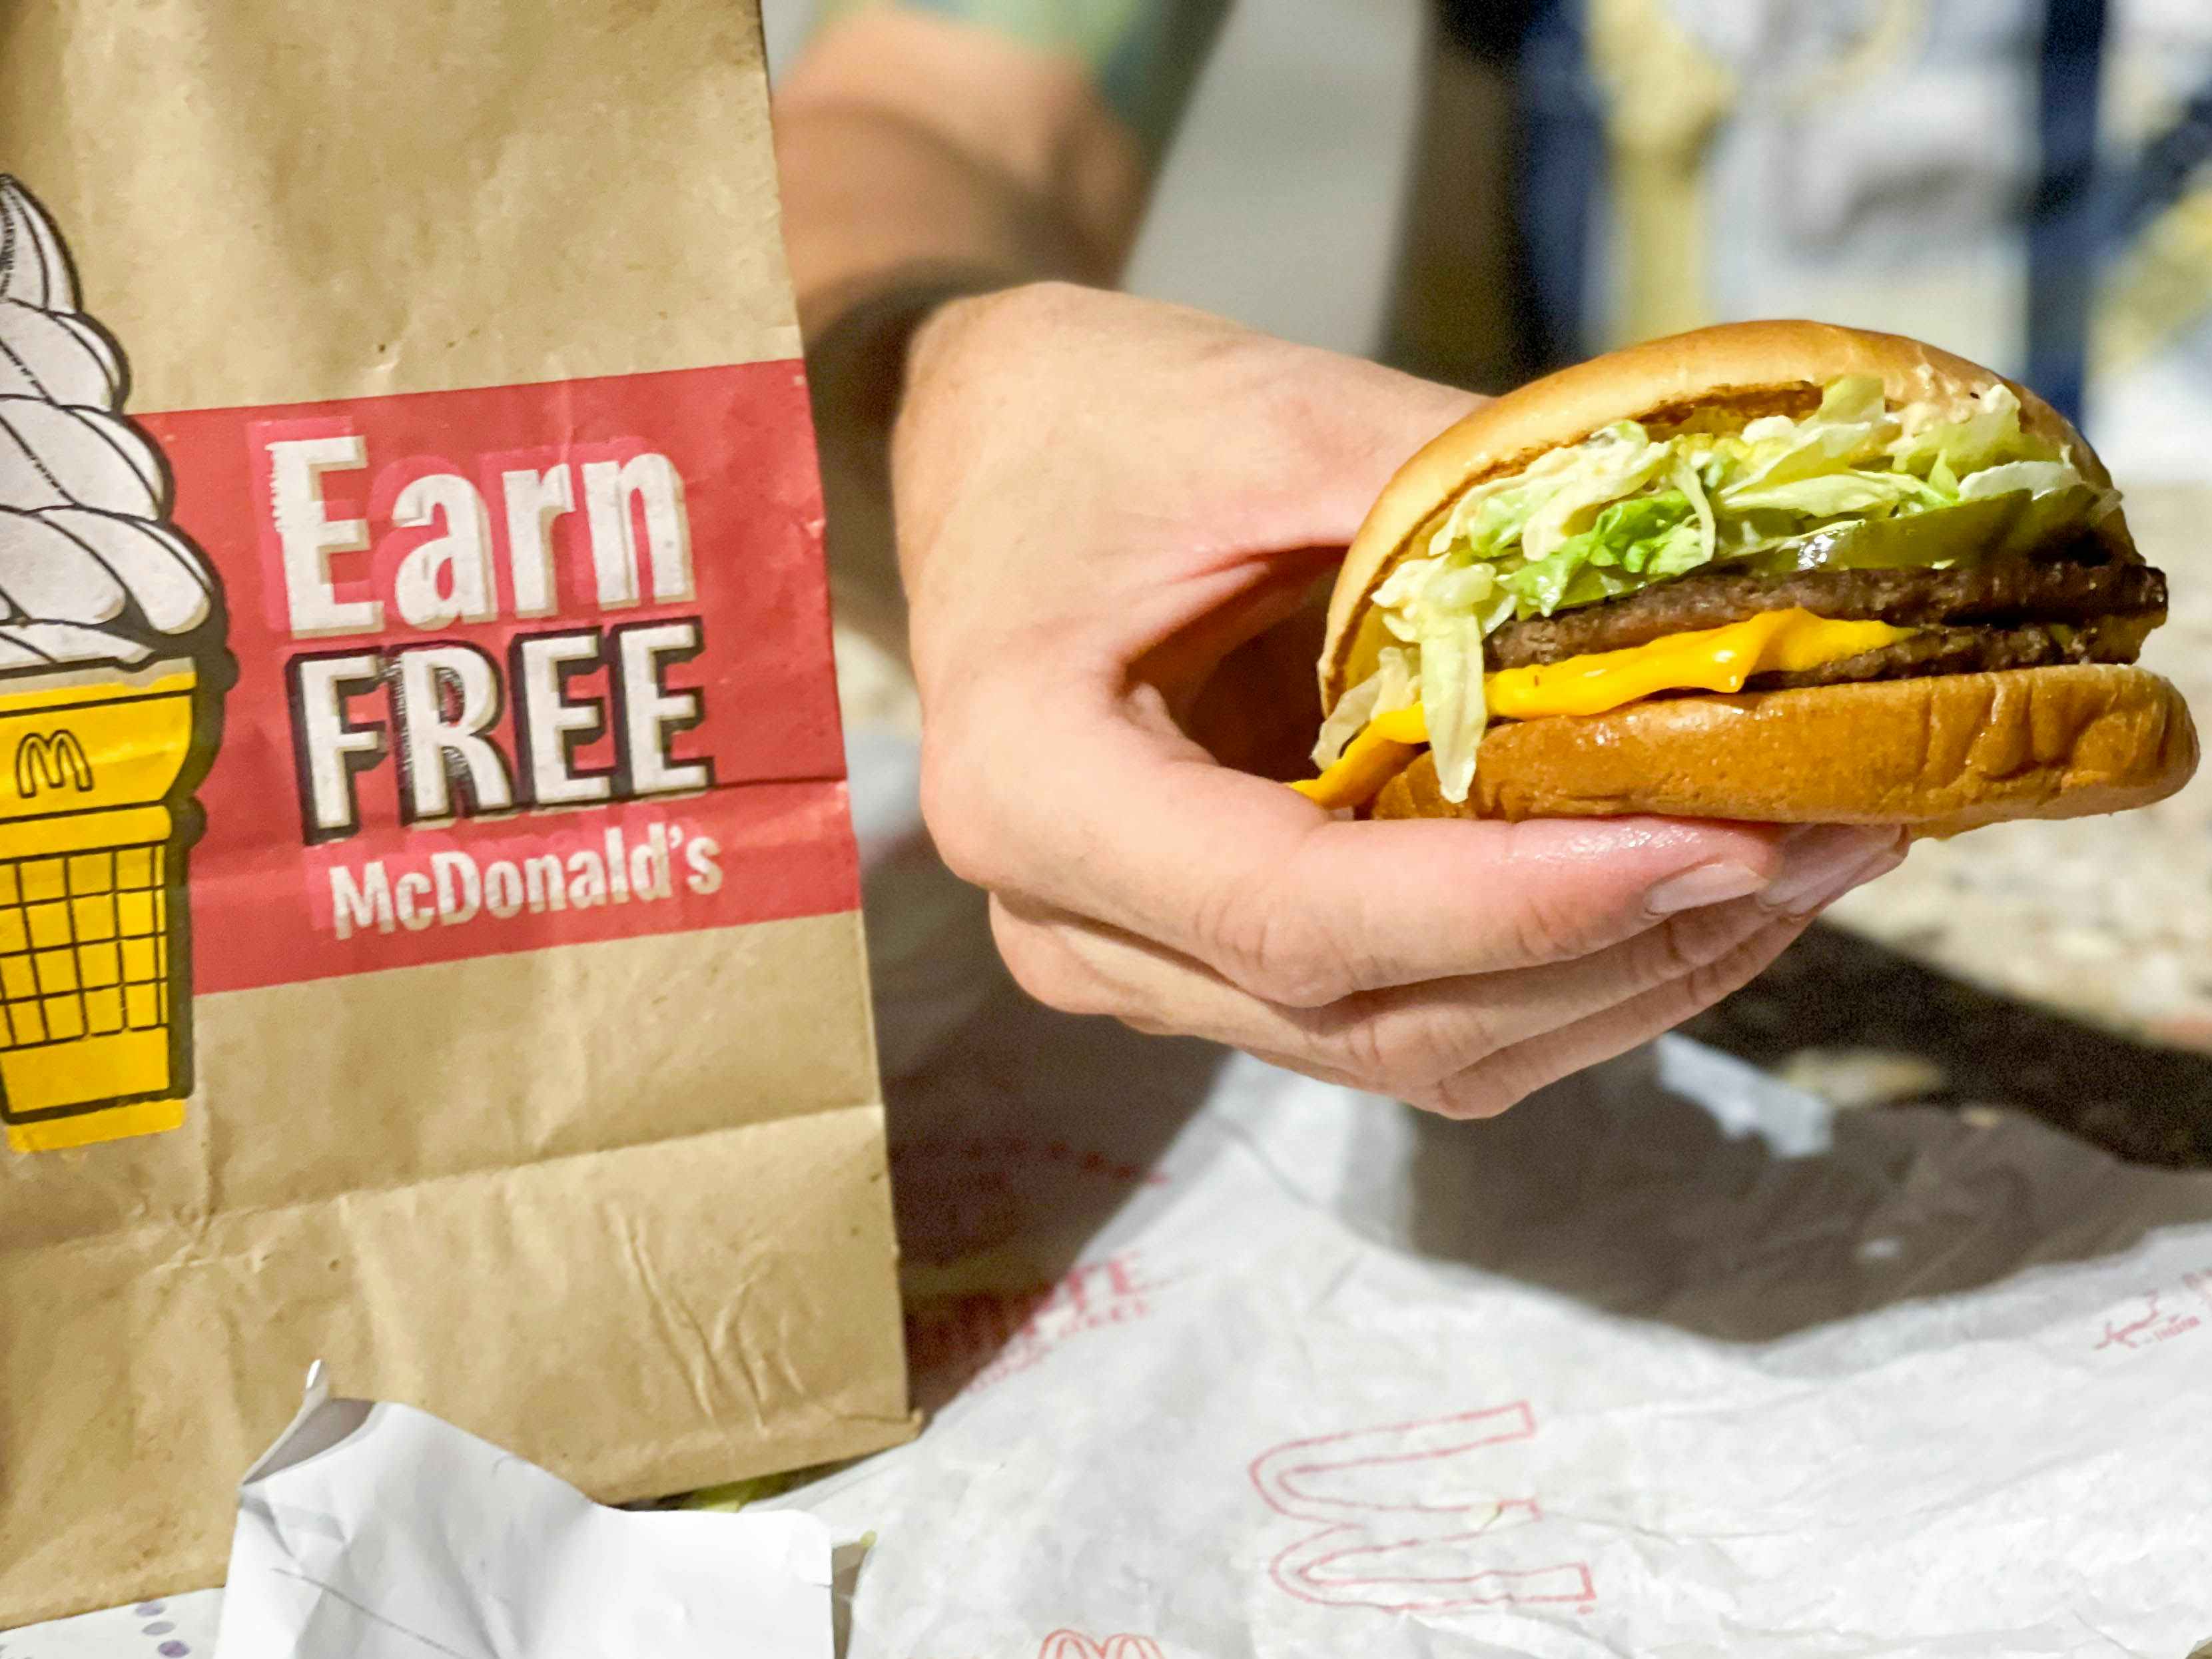 A person holding a McDouble special order burger from McDonald's next to a McDonald's takeout bag that says "Earn FREE McDonald's